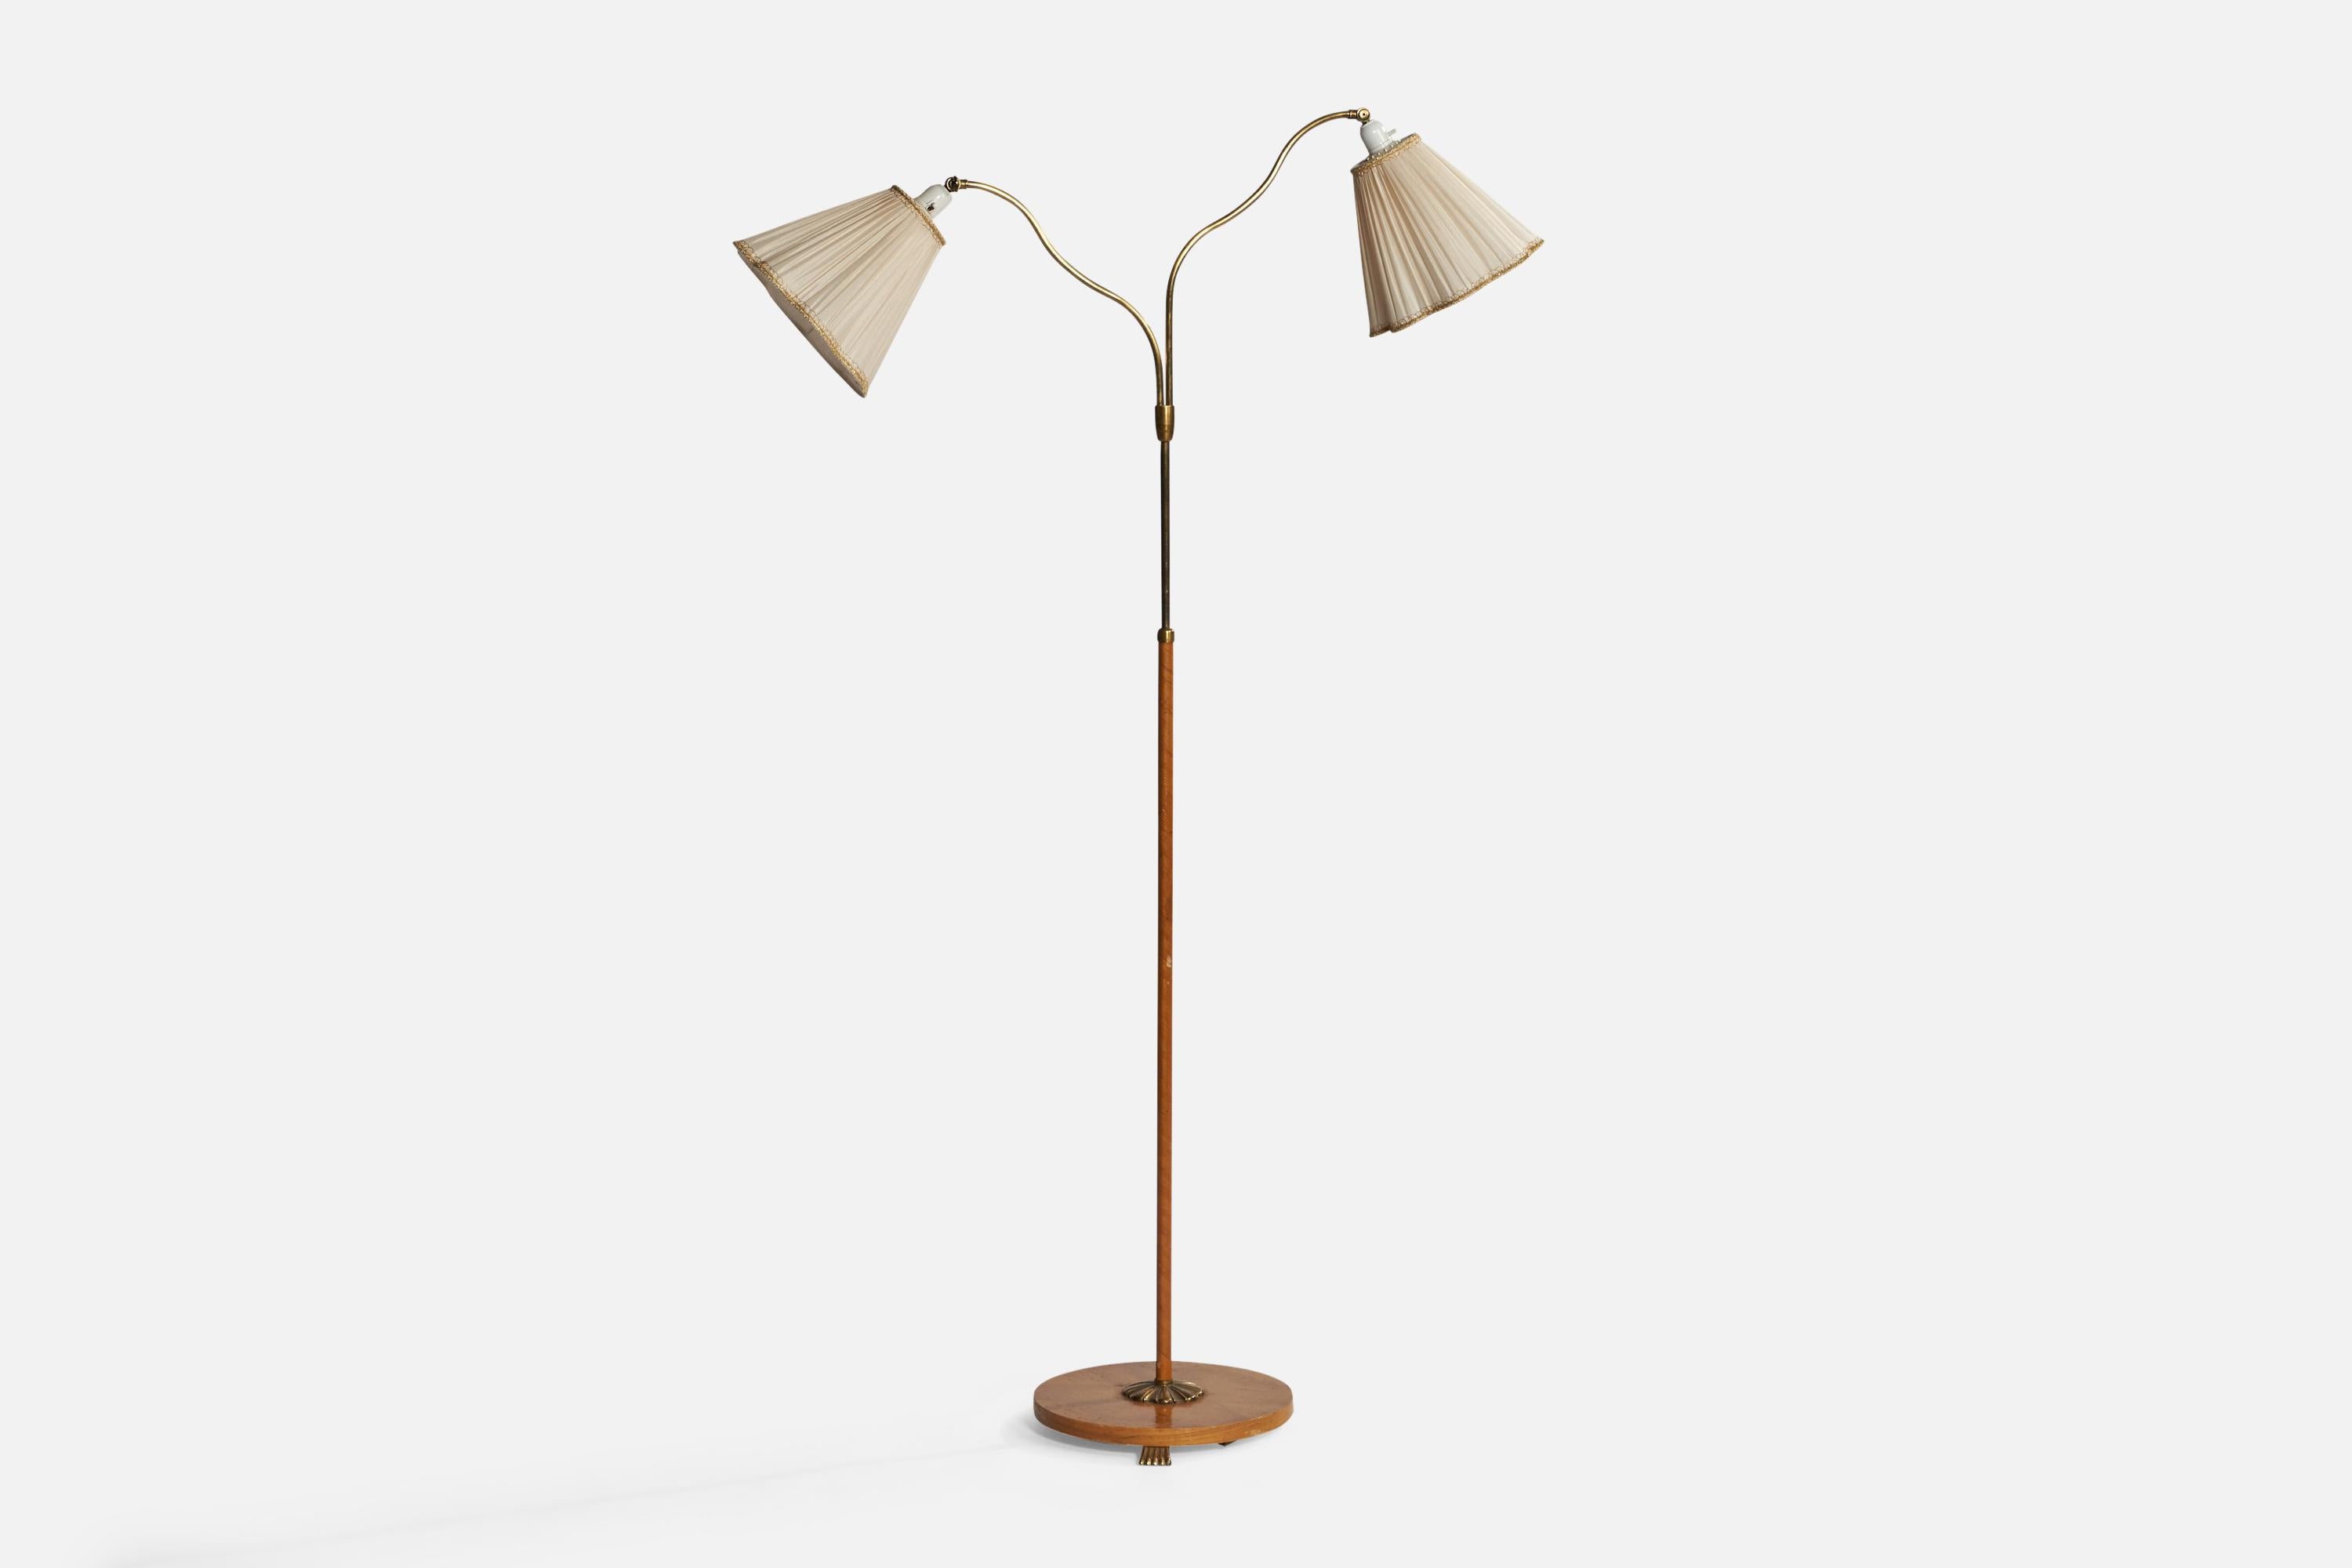 An adjustable organic brass, elm, wood veneer, bakelite and off-white fabric floor lamp designed and produced in Sweden, 1940s.

Overall Dimensions (inches): 66.25” H x 40.5” W x 14” D.Stated dimensions include shades.
Dimensions vary based on